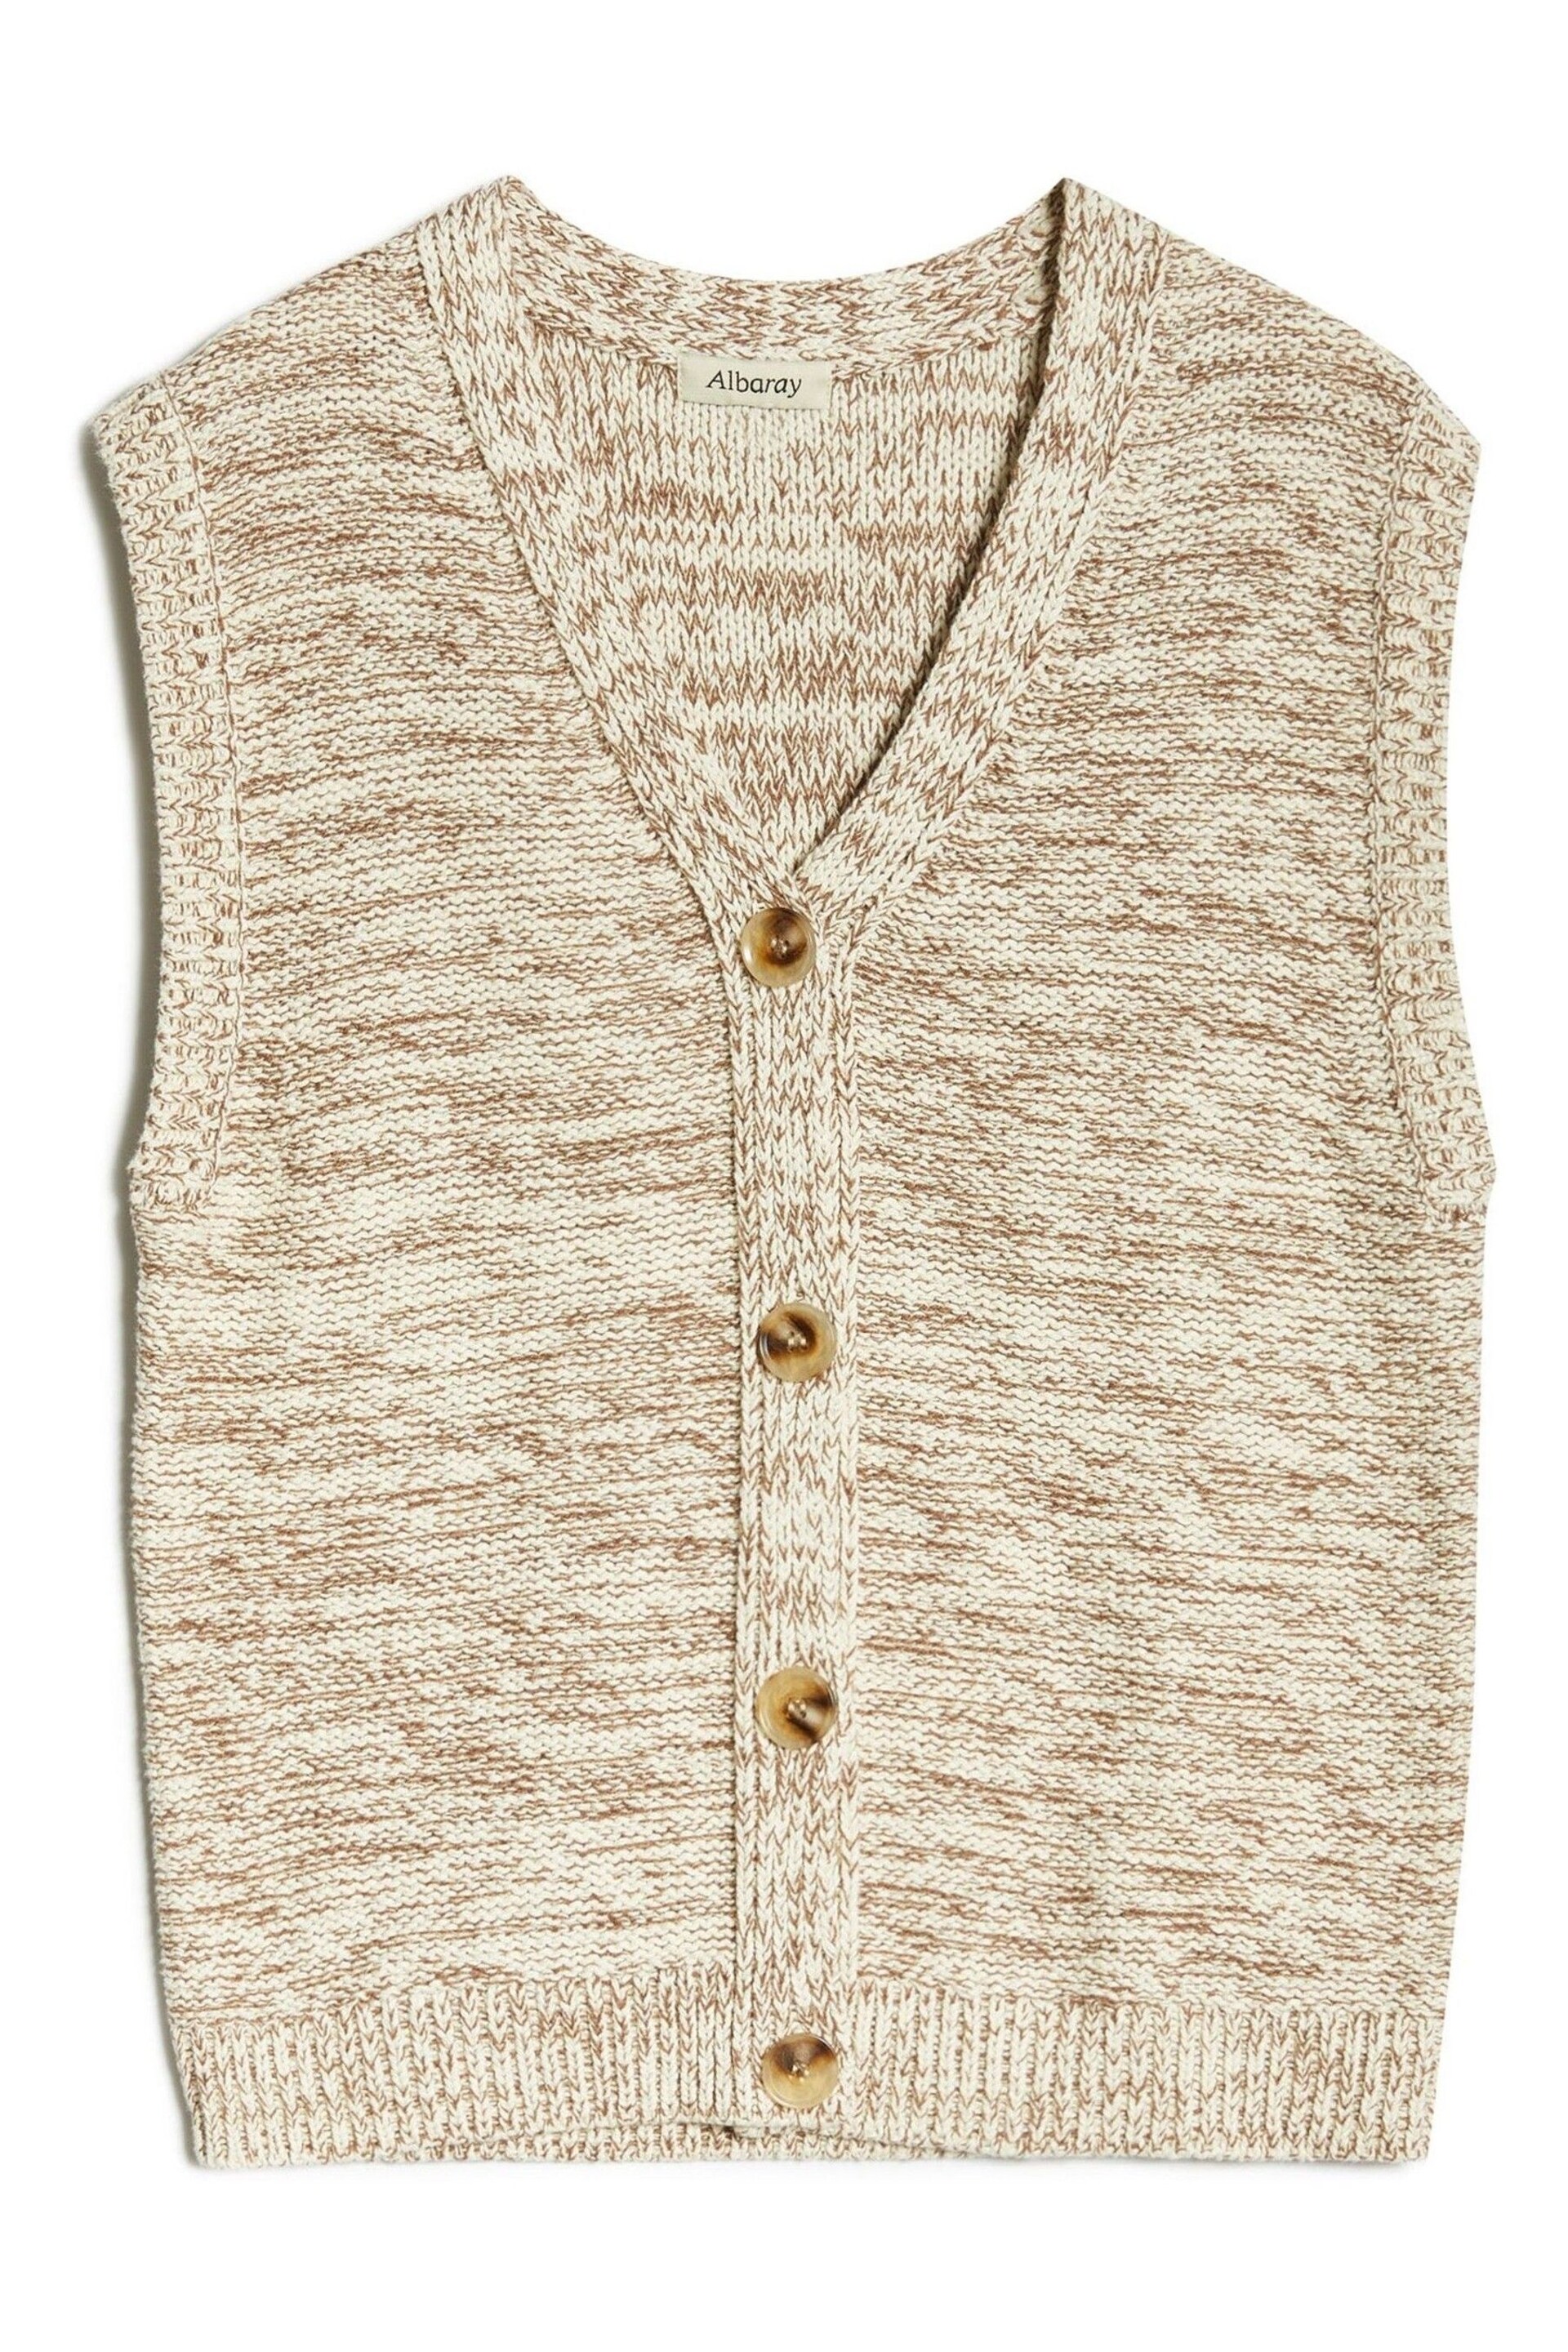 Albaray Relaxed Knitted Tweed Brown Waistcoat - Image 4 of 4